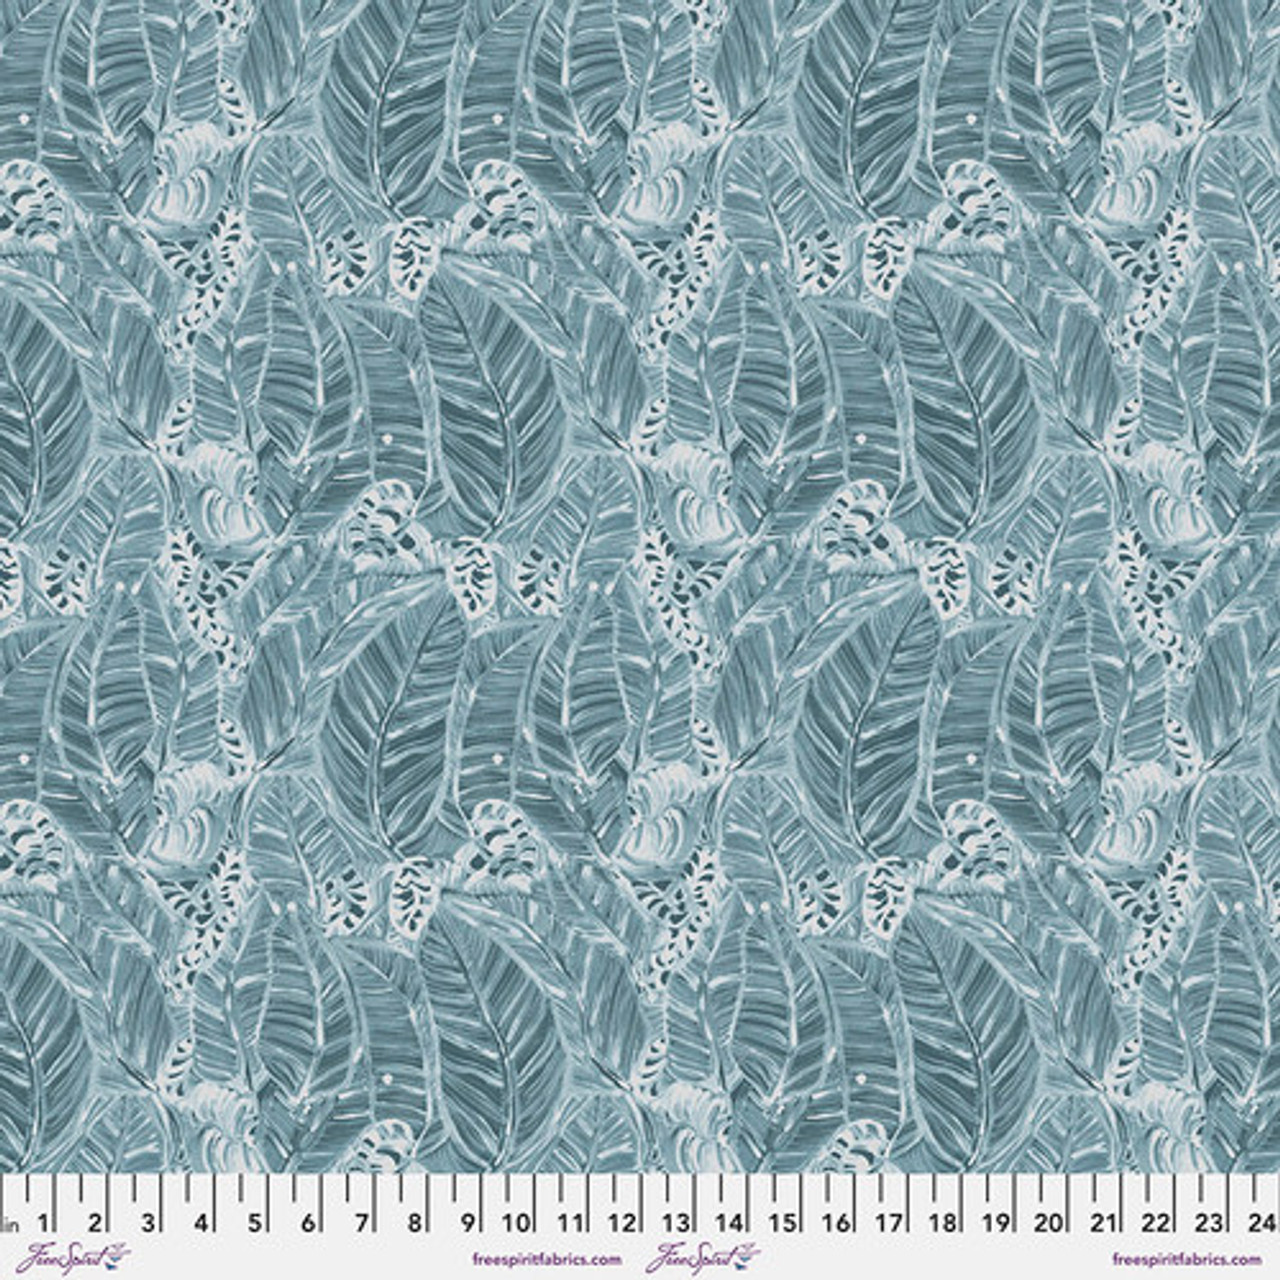 Denise Burkitt Special Moments Dusky Landscape Teal Cotton Fabric By Yard